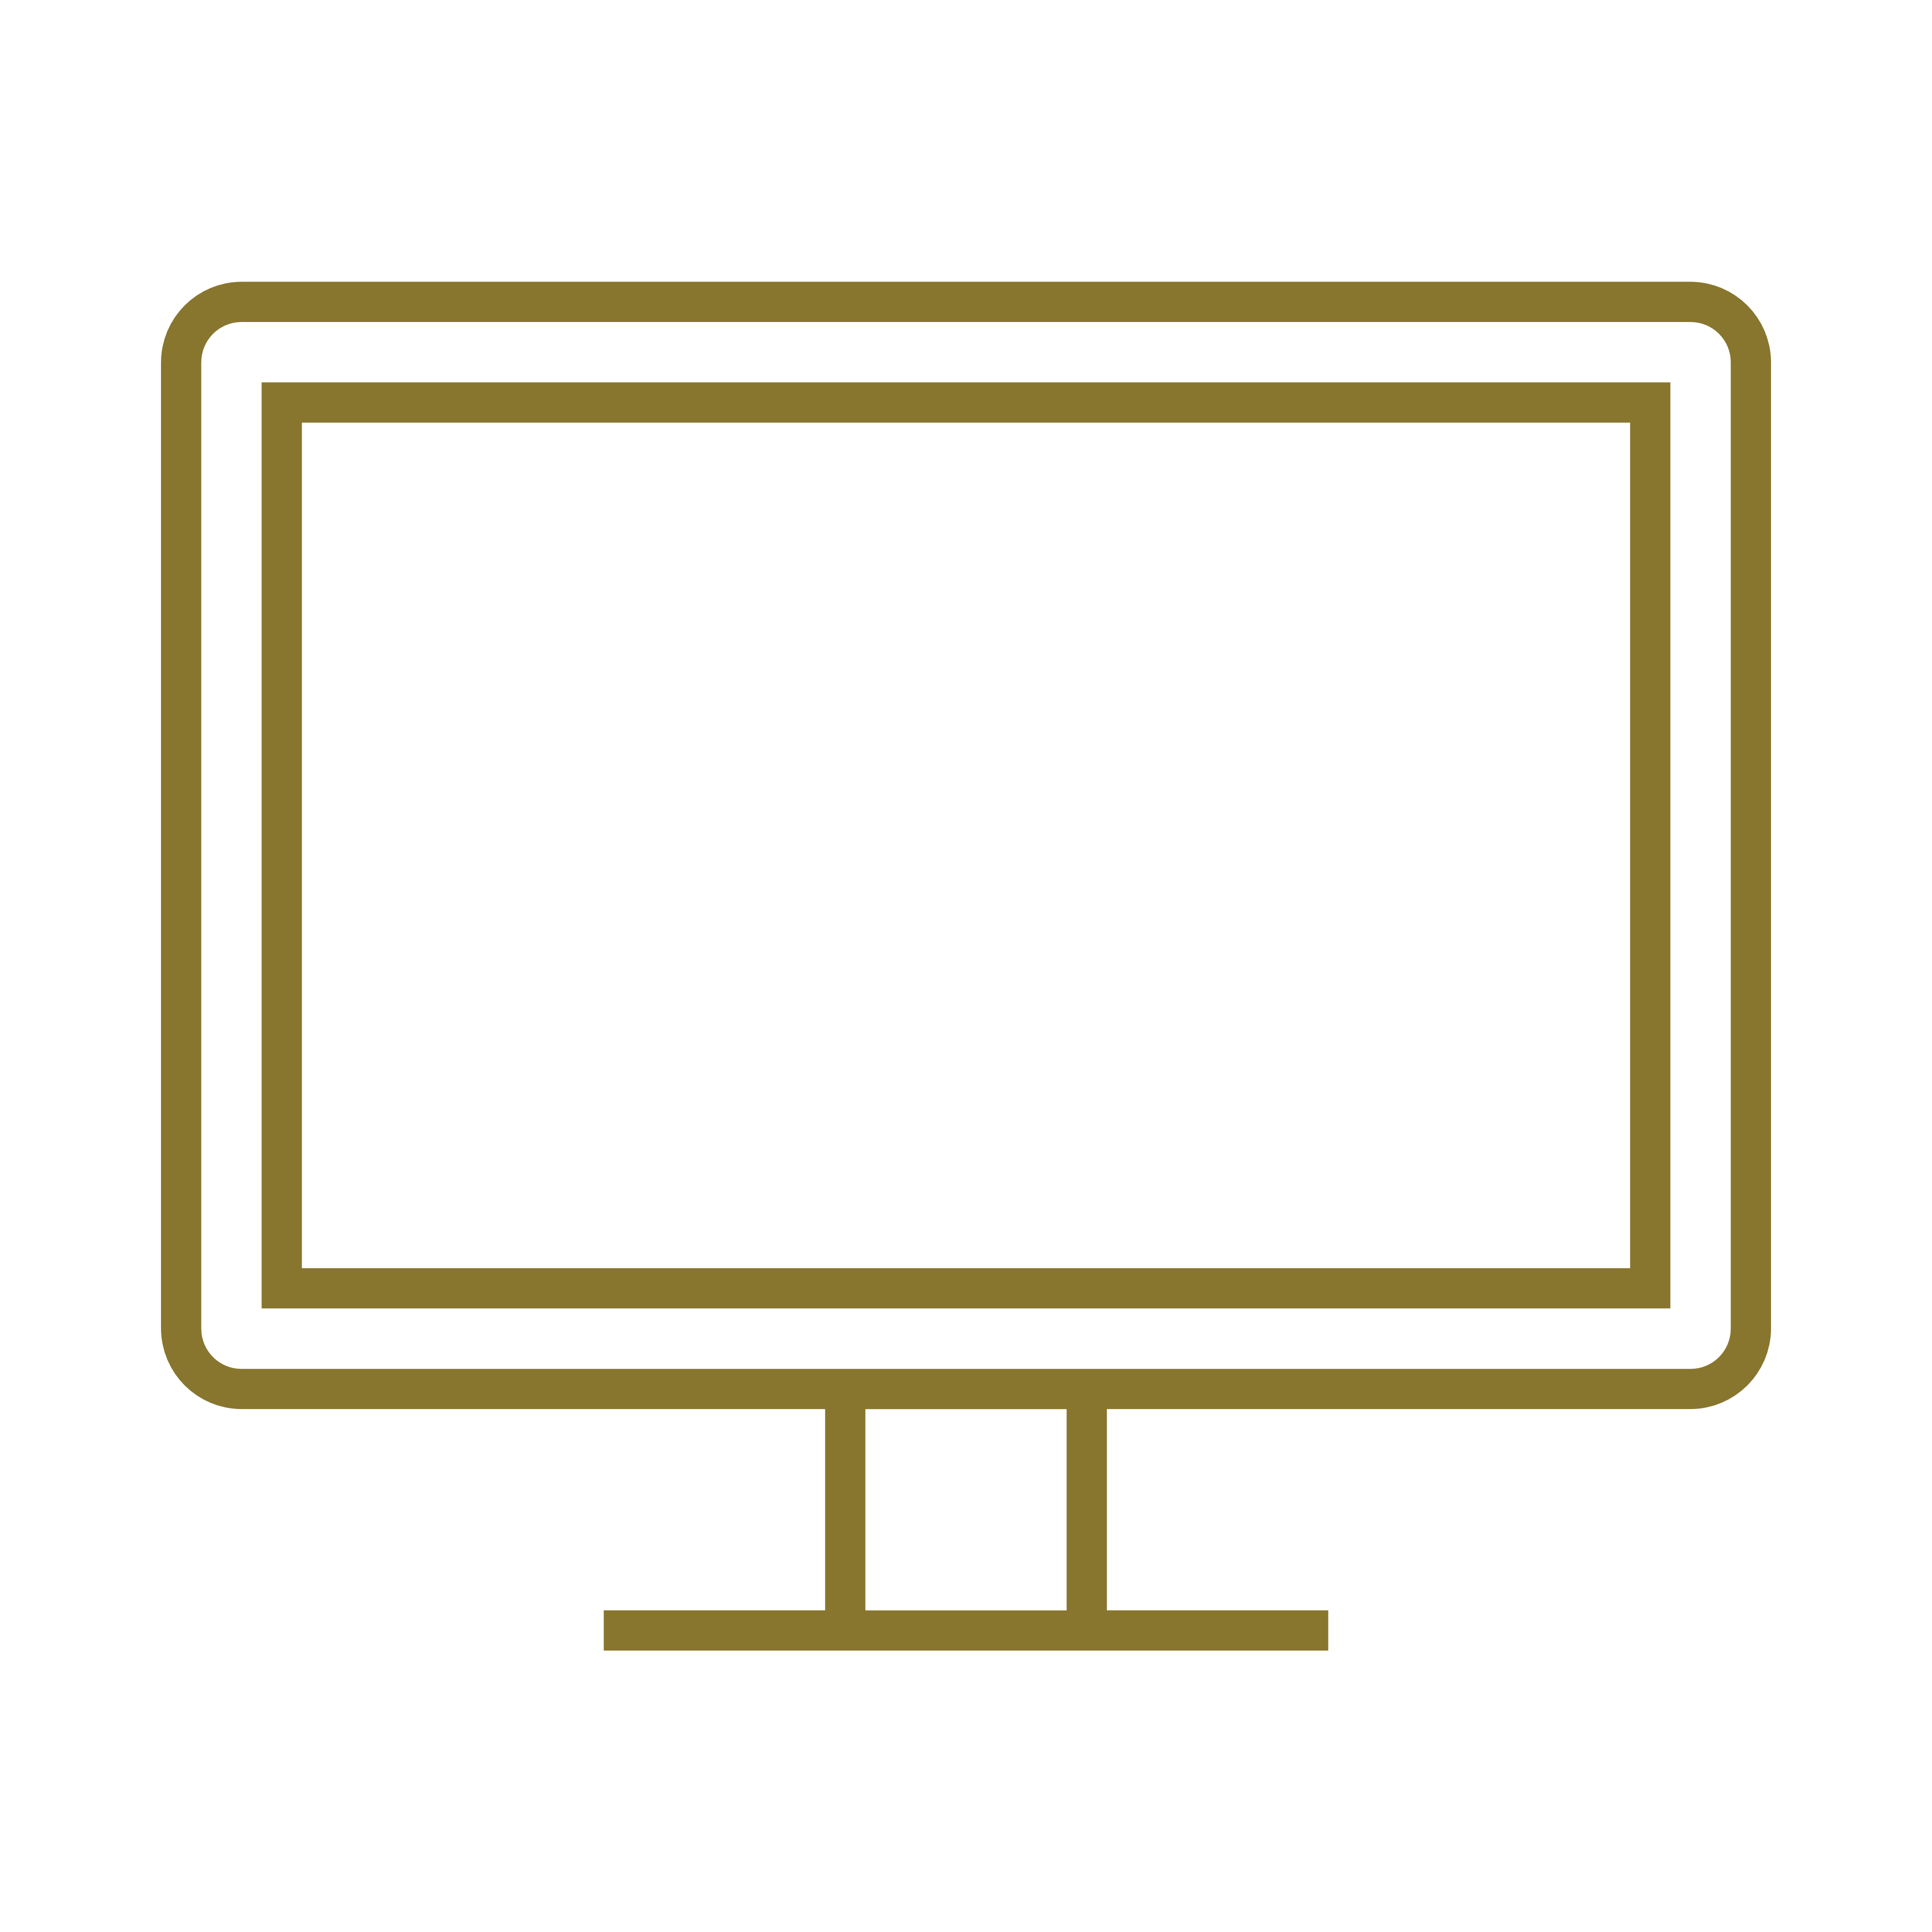 A gold icon of a computer